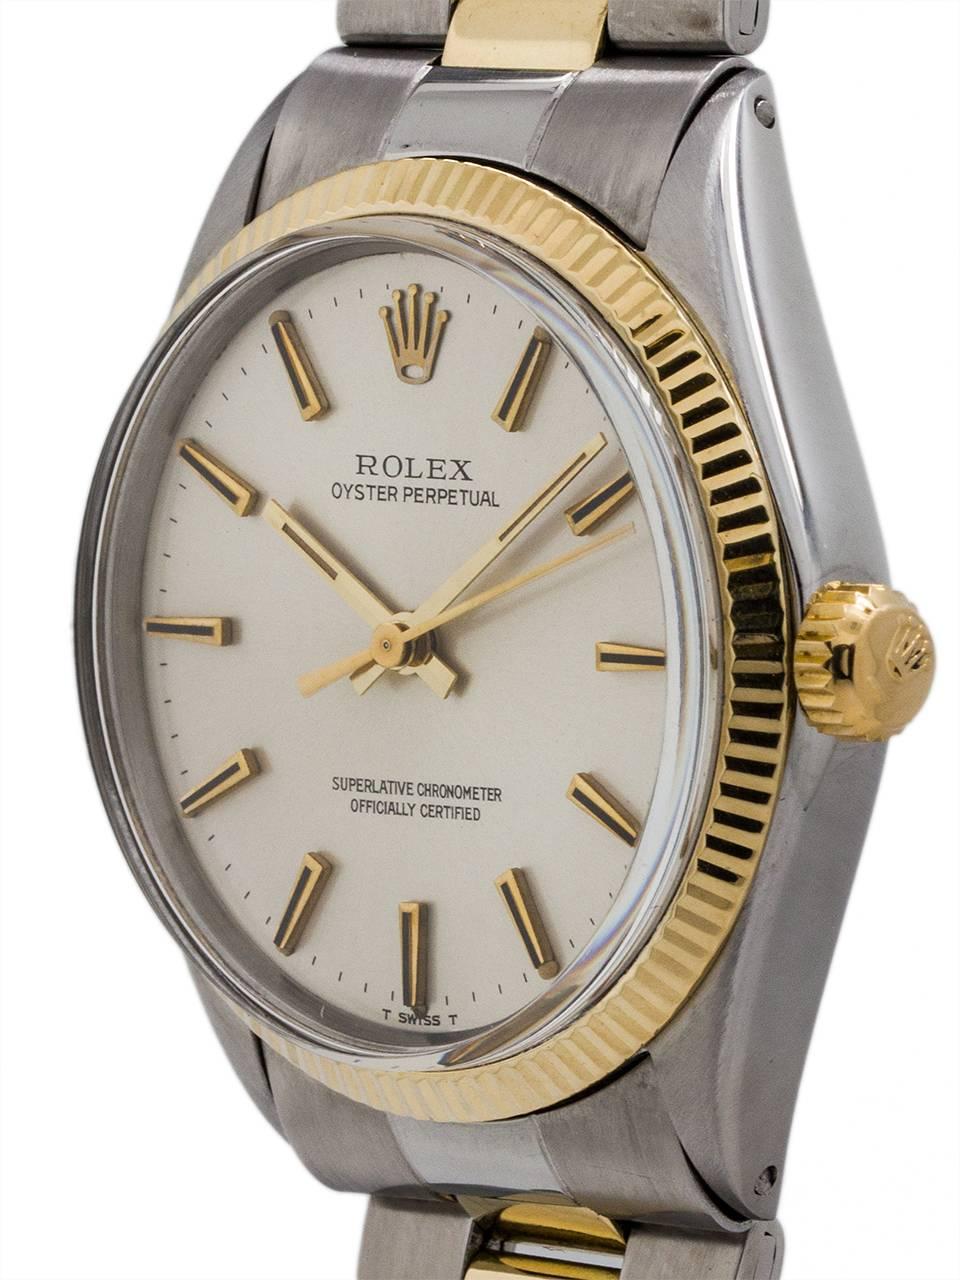 Rolex Stainless Steel and 14K yellow gold Oyster Perpetual ref 1005 serial #2.2 million circa 1969. Featuring 34mm diameter case with fine engine turned “milled” bezel and acrylic crystal. With original silver satin dial with applied gold indexes